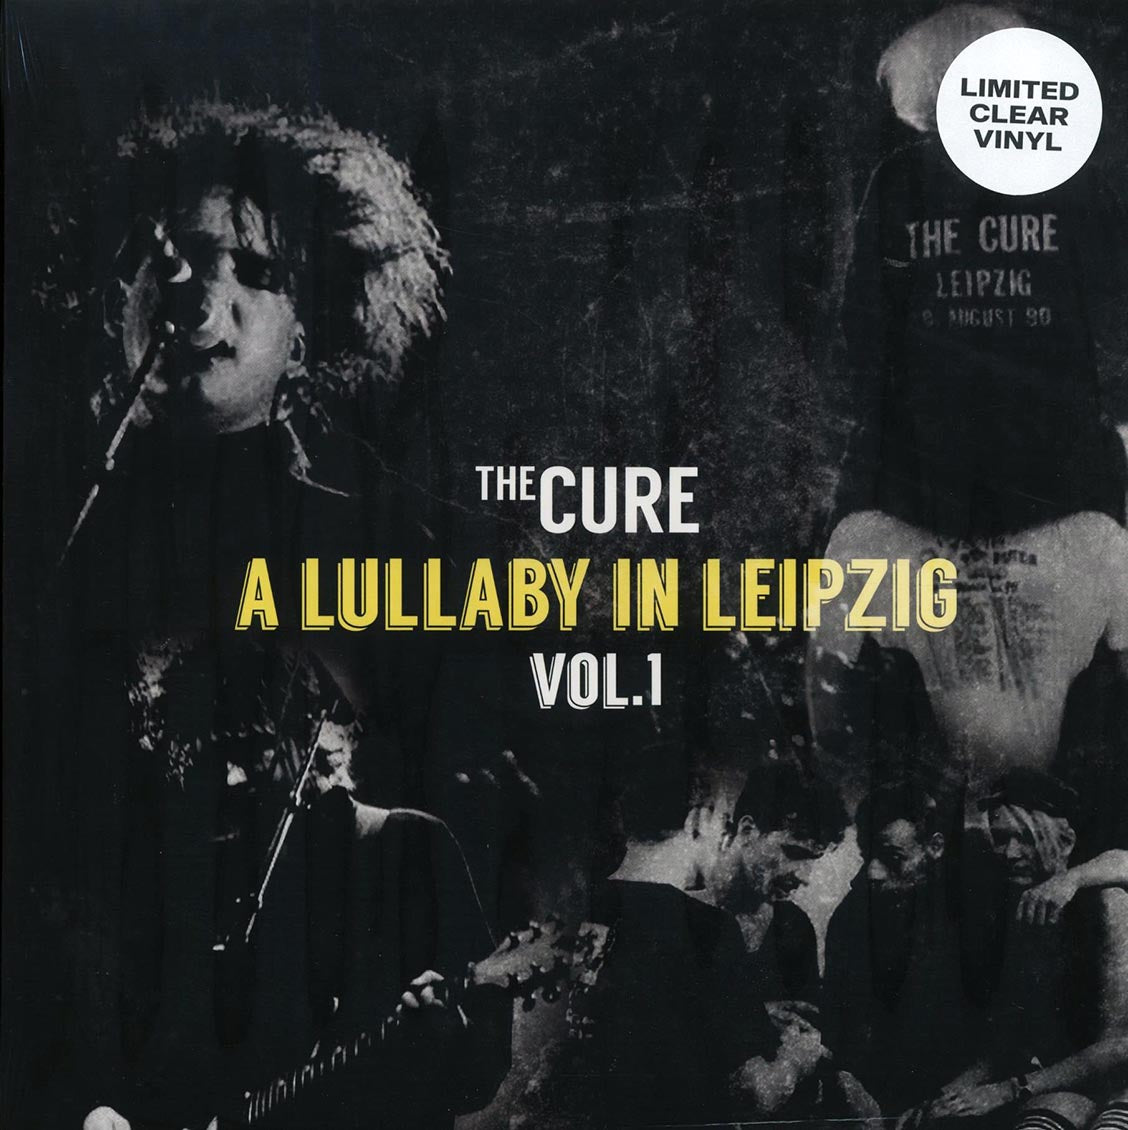 The Cure - A Lullaby In Leipzig Volume 1 (clear vinyl) - Vinyl LP